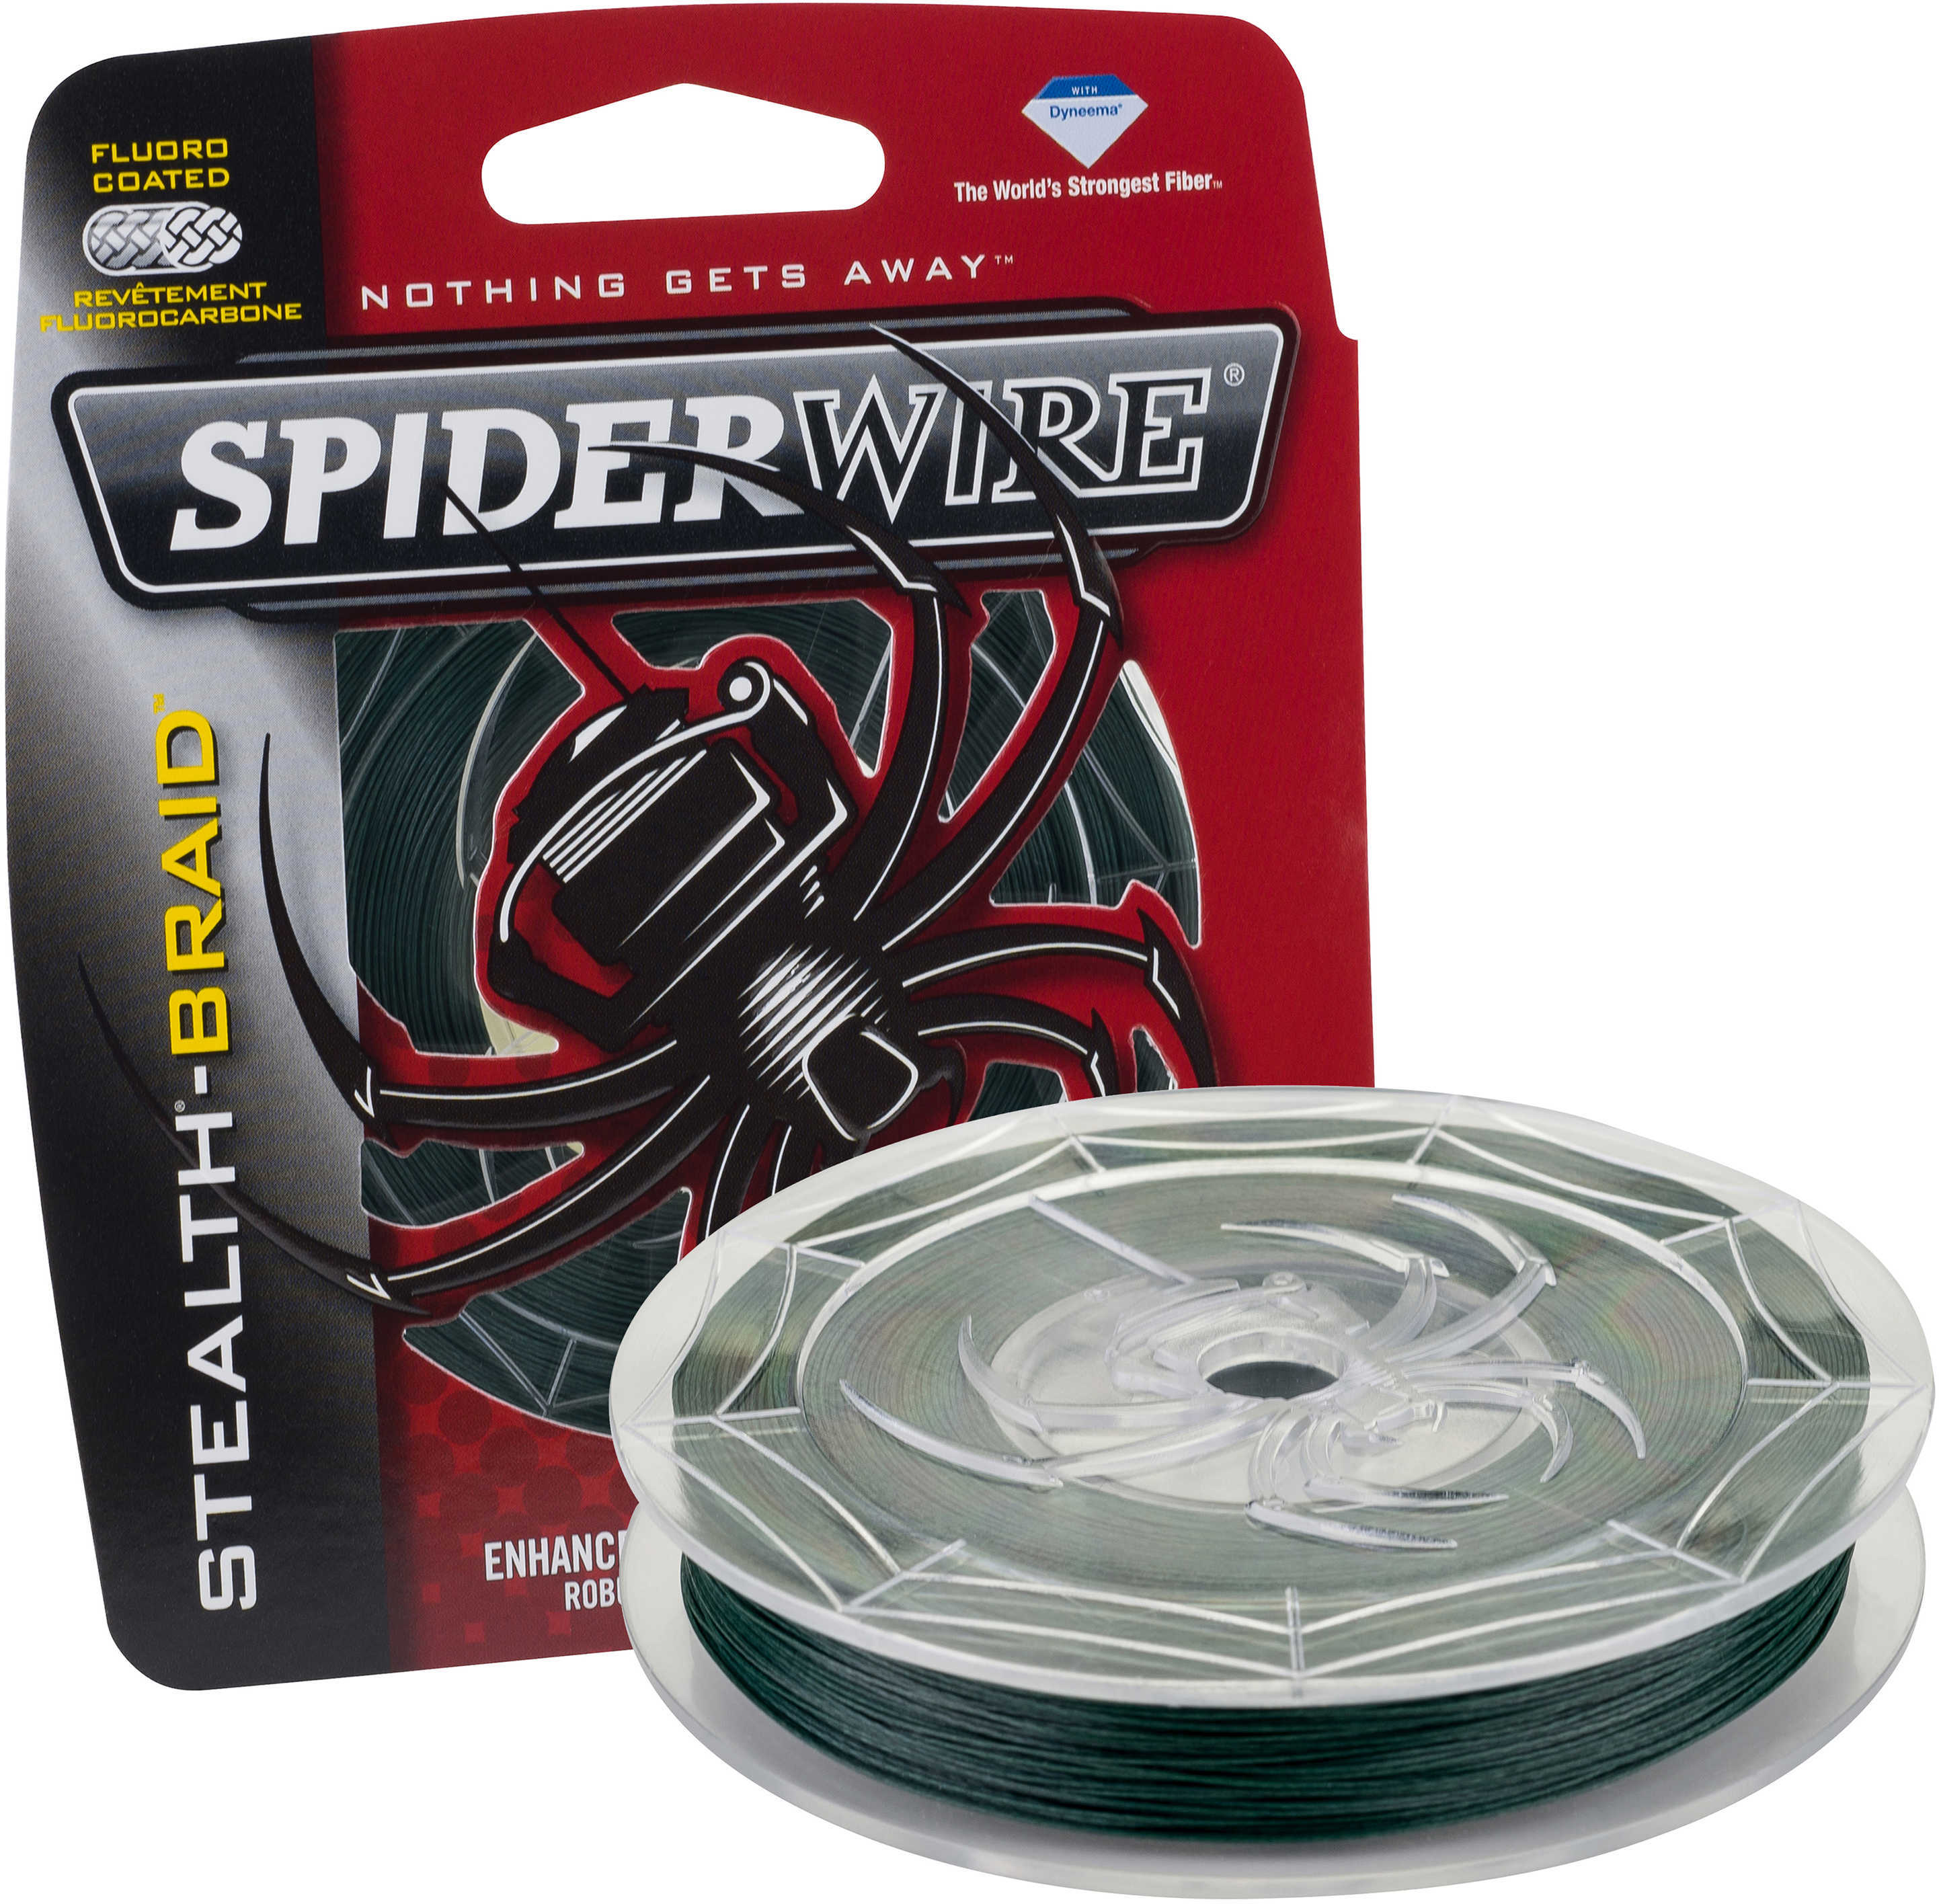 Spiderwire Stealth Braid 200 Yards , 8 lbs Strength, 0.007" Diameter, Moss Green Md: 1374596